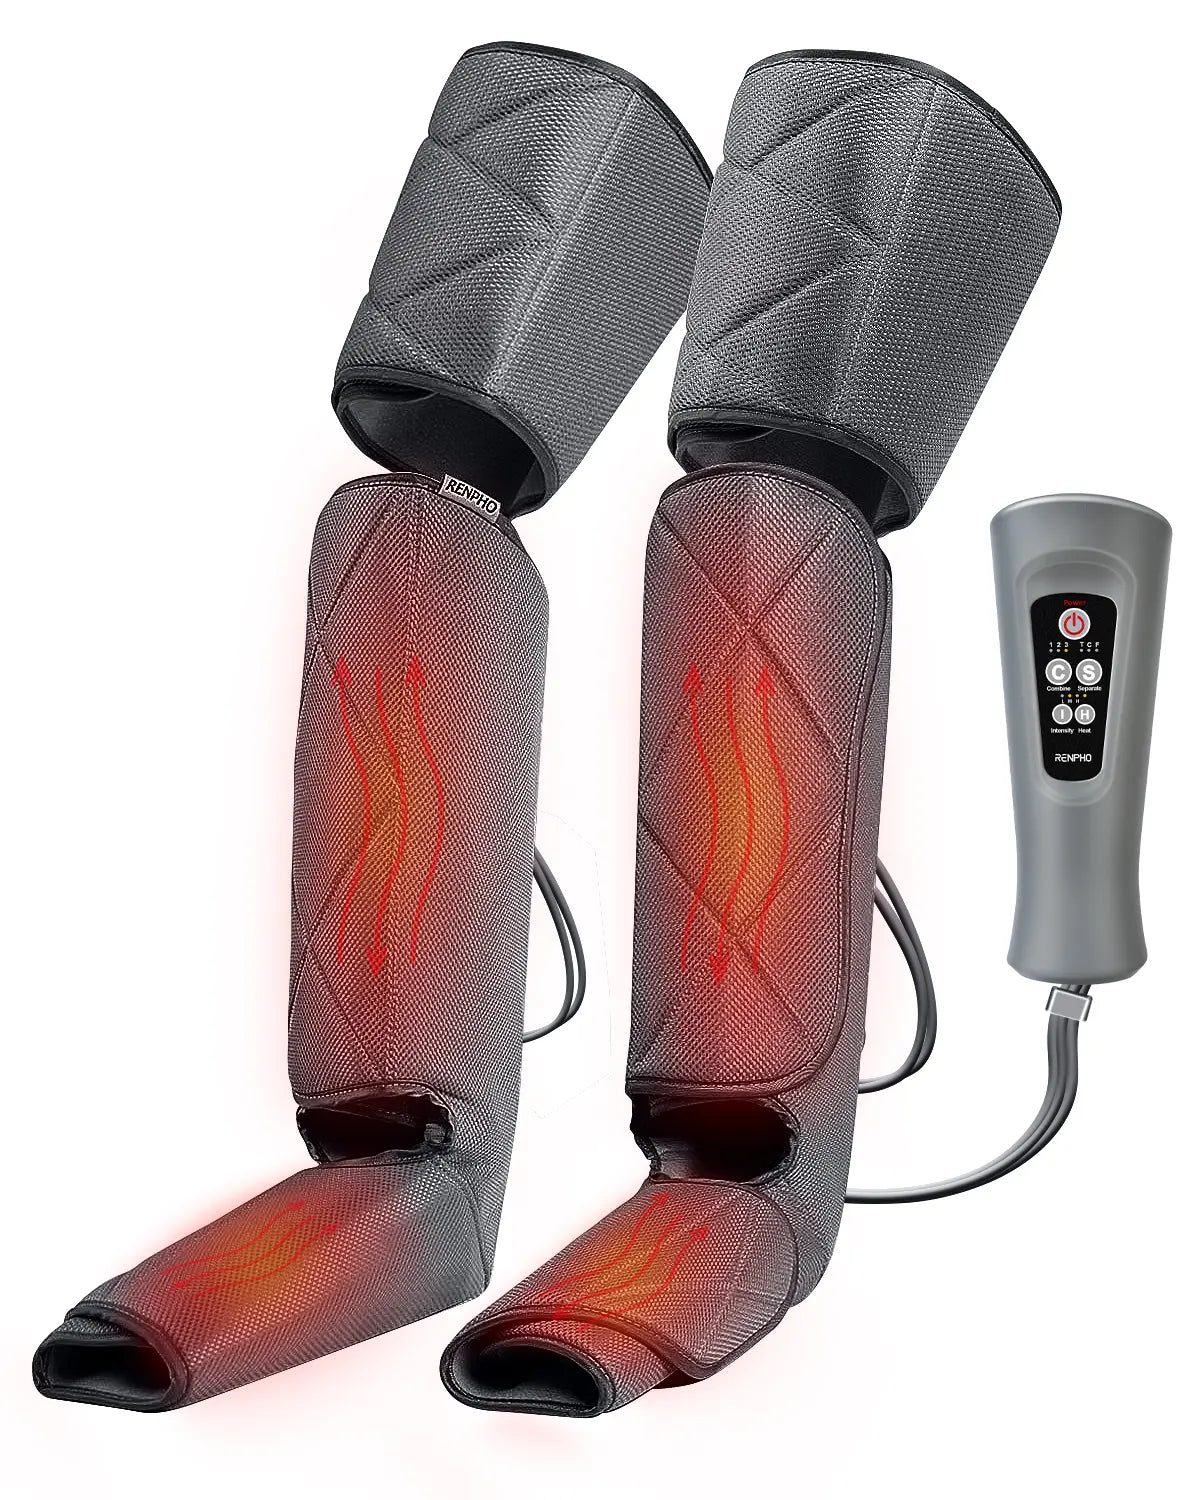 The Aeria Ultimate Thermal Full Leg Massager by Renpho EU, a pair of gray leg massagers with heat settings, provides comforting red waves to relieve tension. This wrap-around solution covers calves and feet and connects to a gray remote control with multiple buttons for various settings. The remote features a black display and a power button for easy operation.